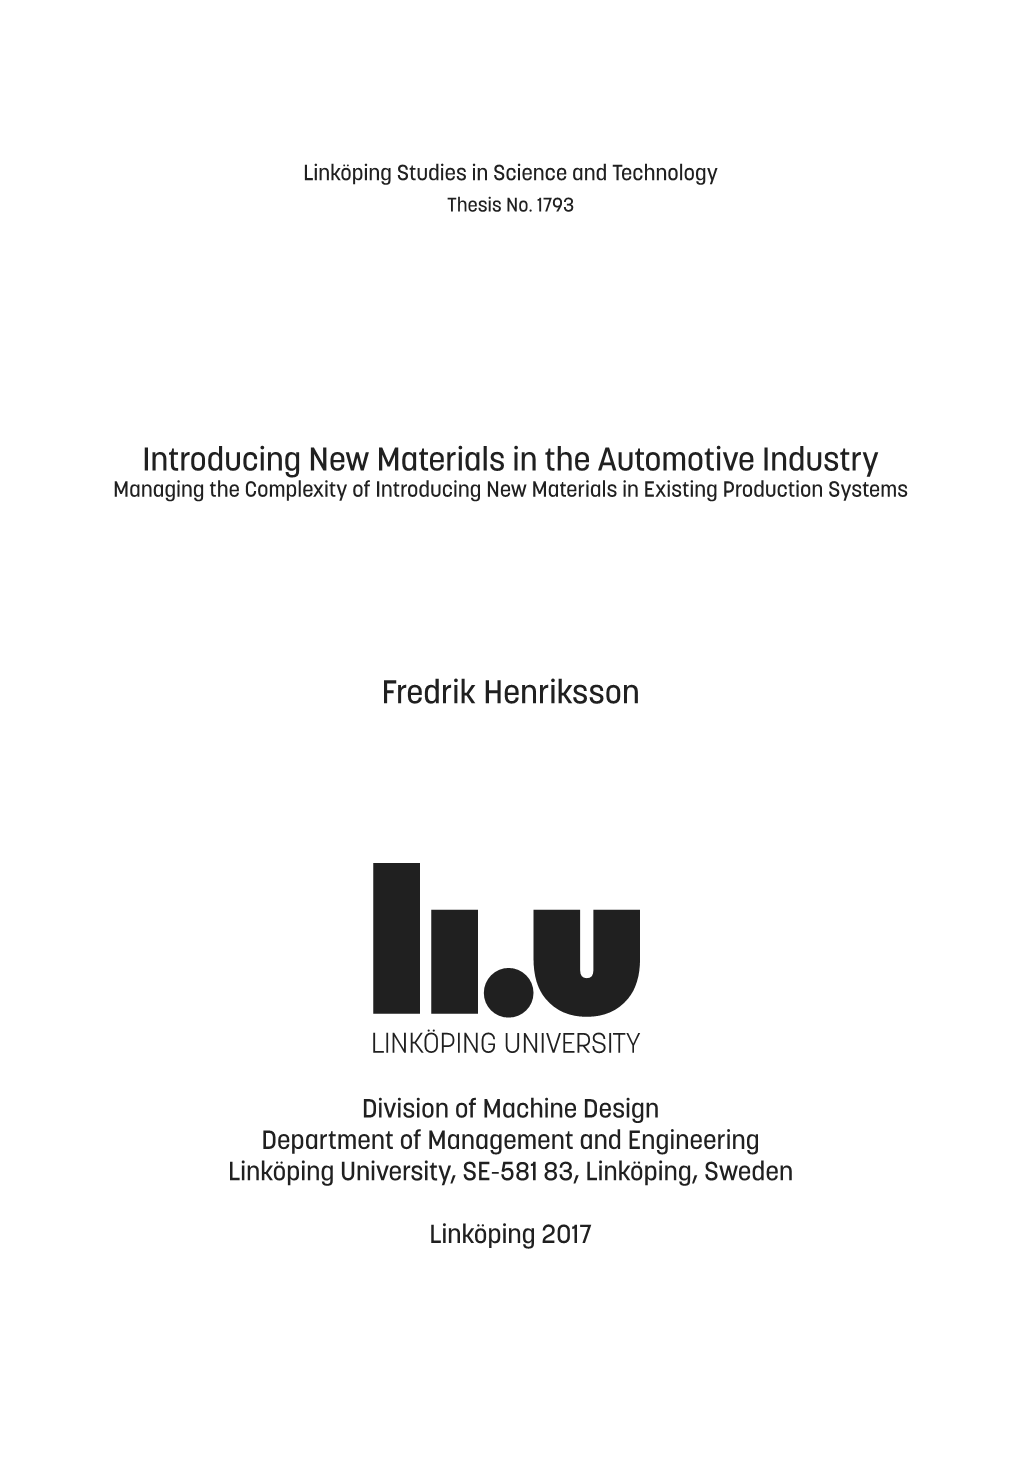 Introducing New Materials in the Automotive Industry Managing the Complexity of Introducing New Materials in Existing Production Systems